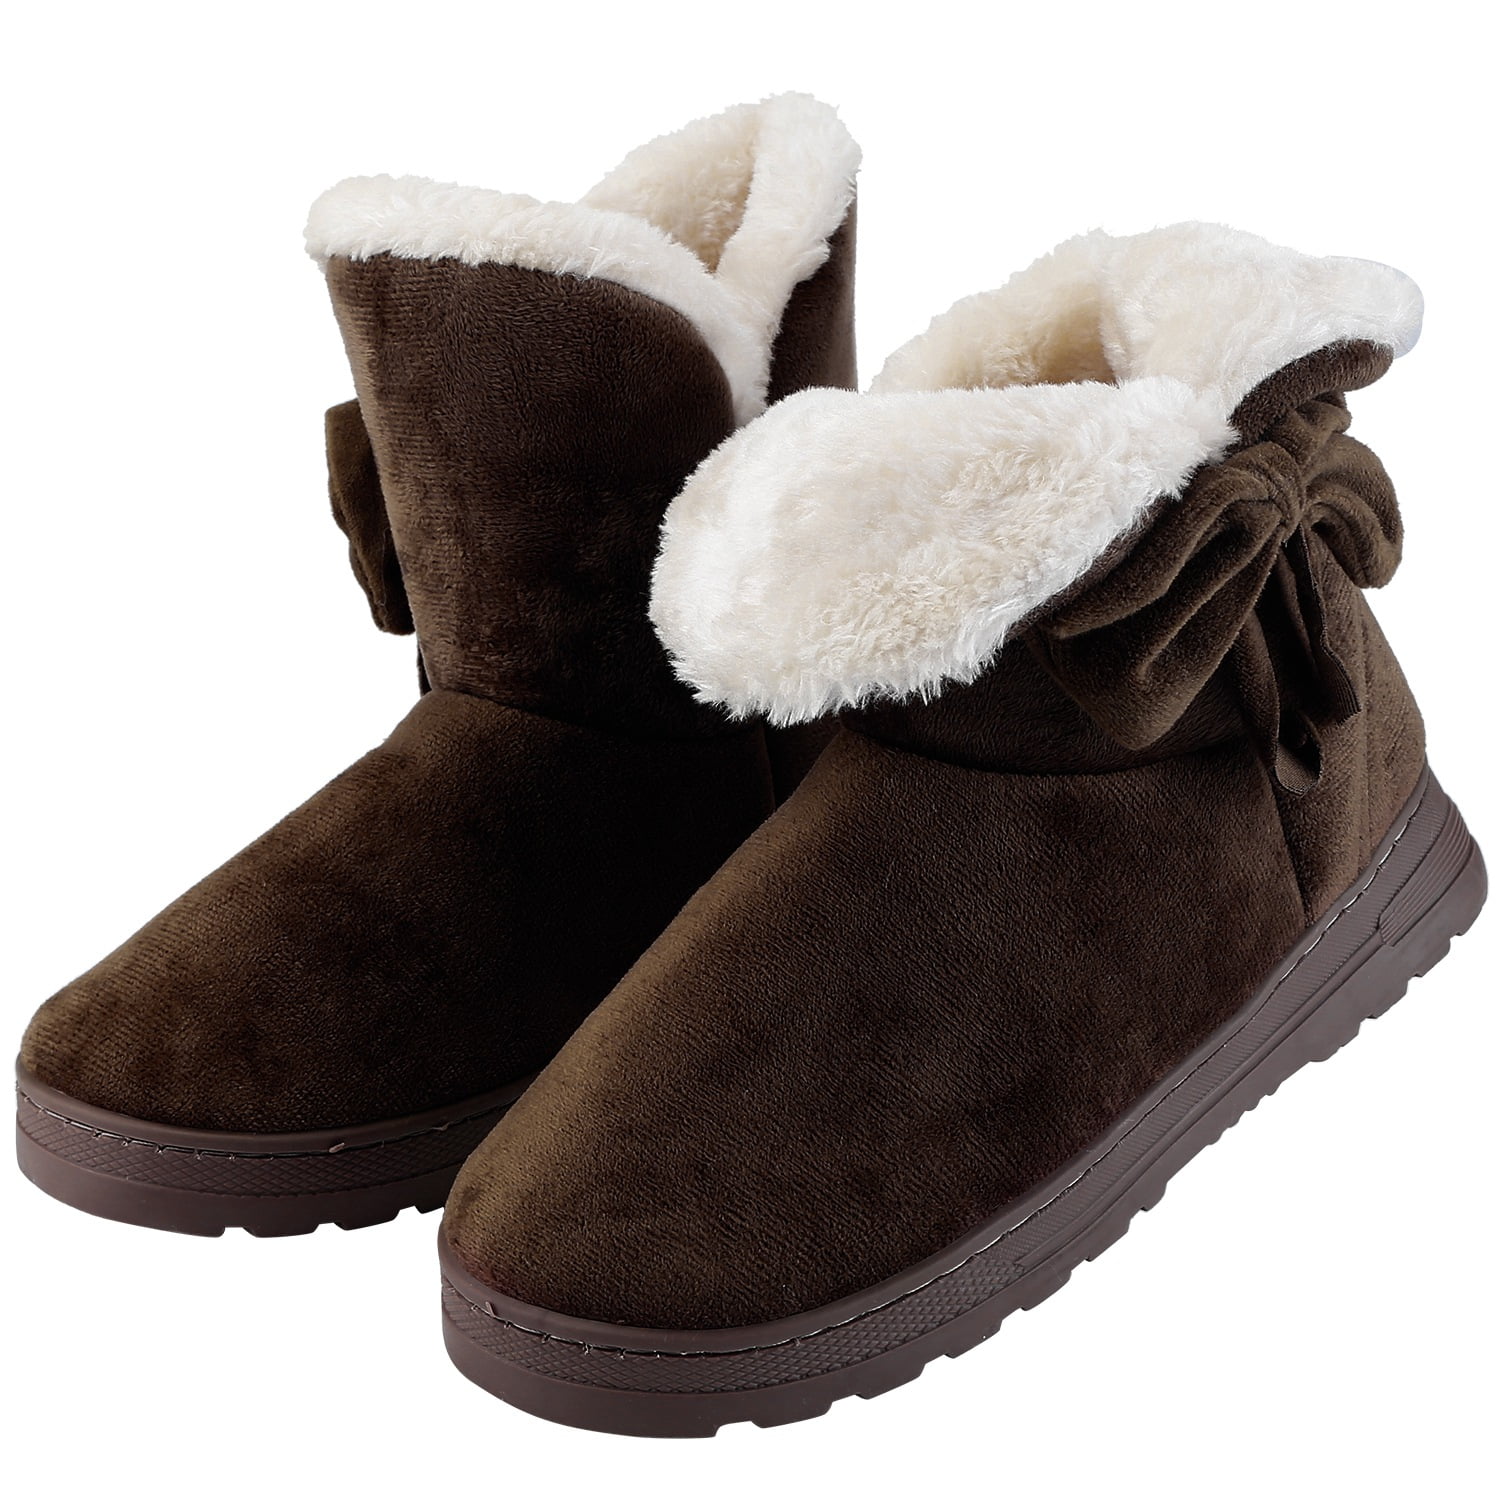 Women's Winter Warm Bowknot Ankle Snow Boots Fur Thick Ski Flats Casual Shoes US 